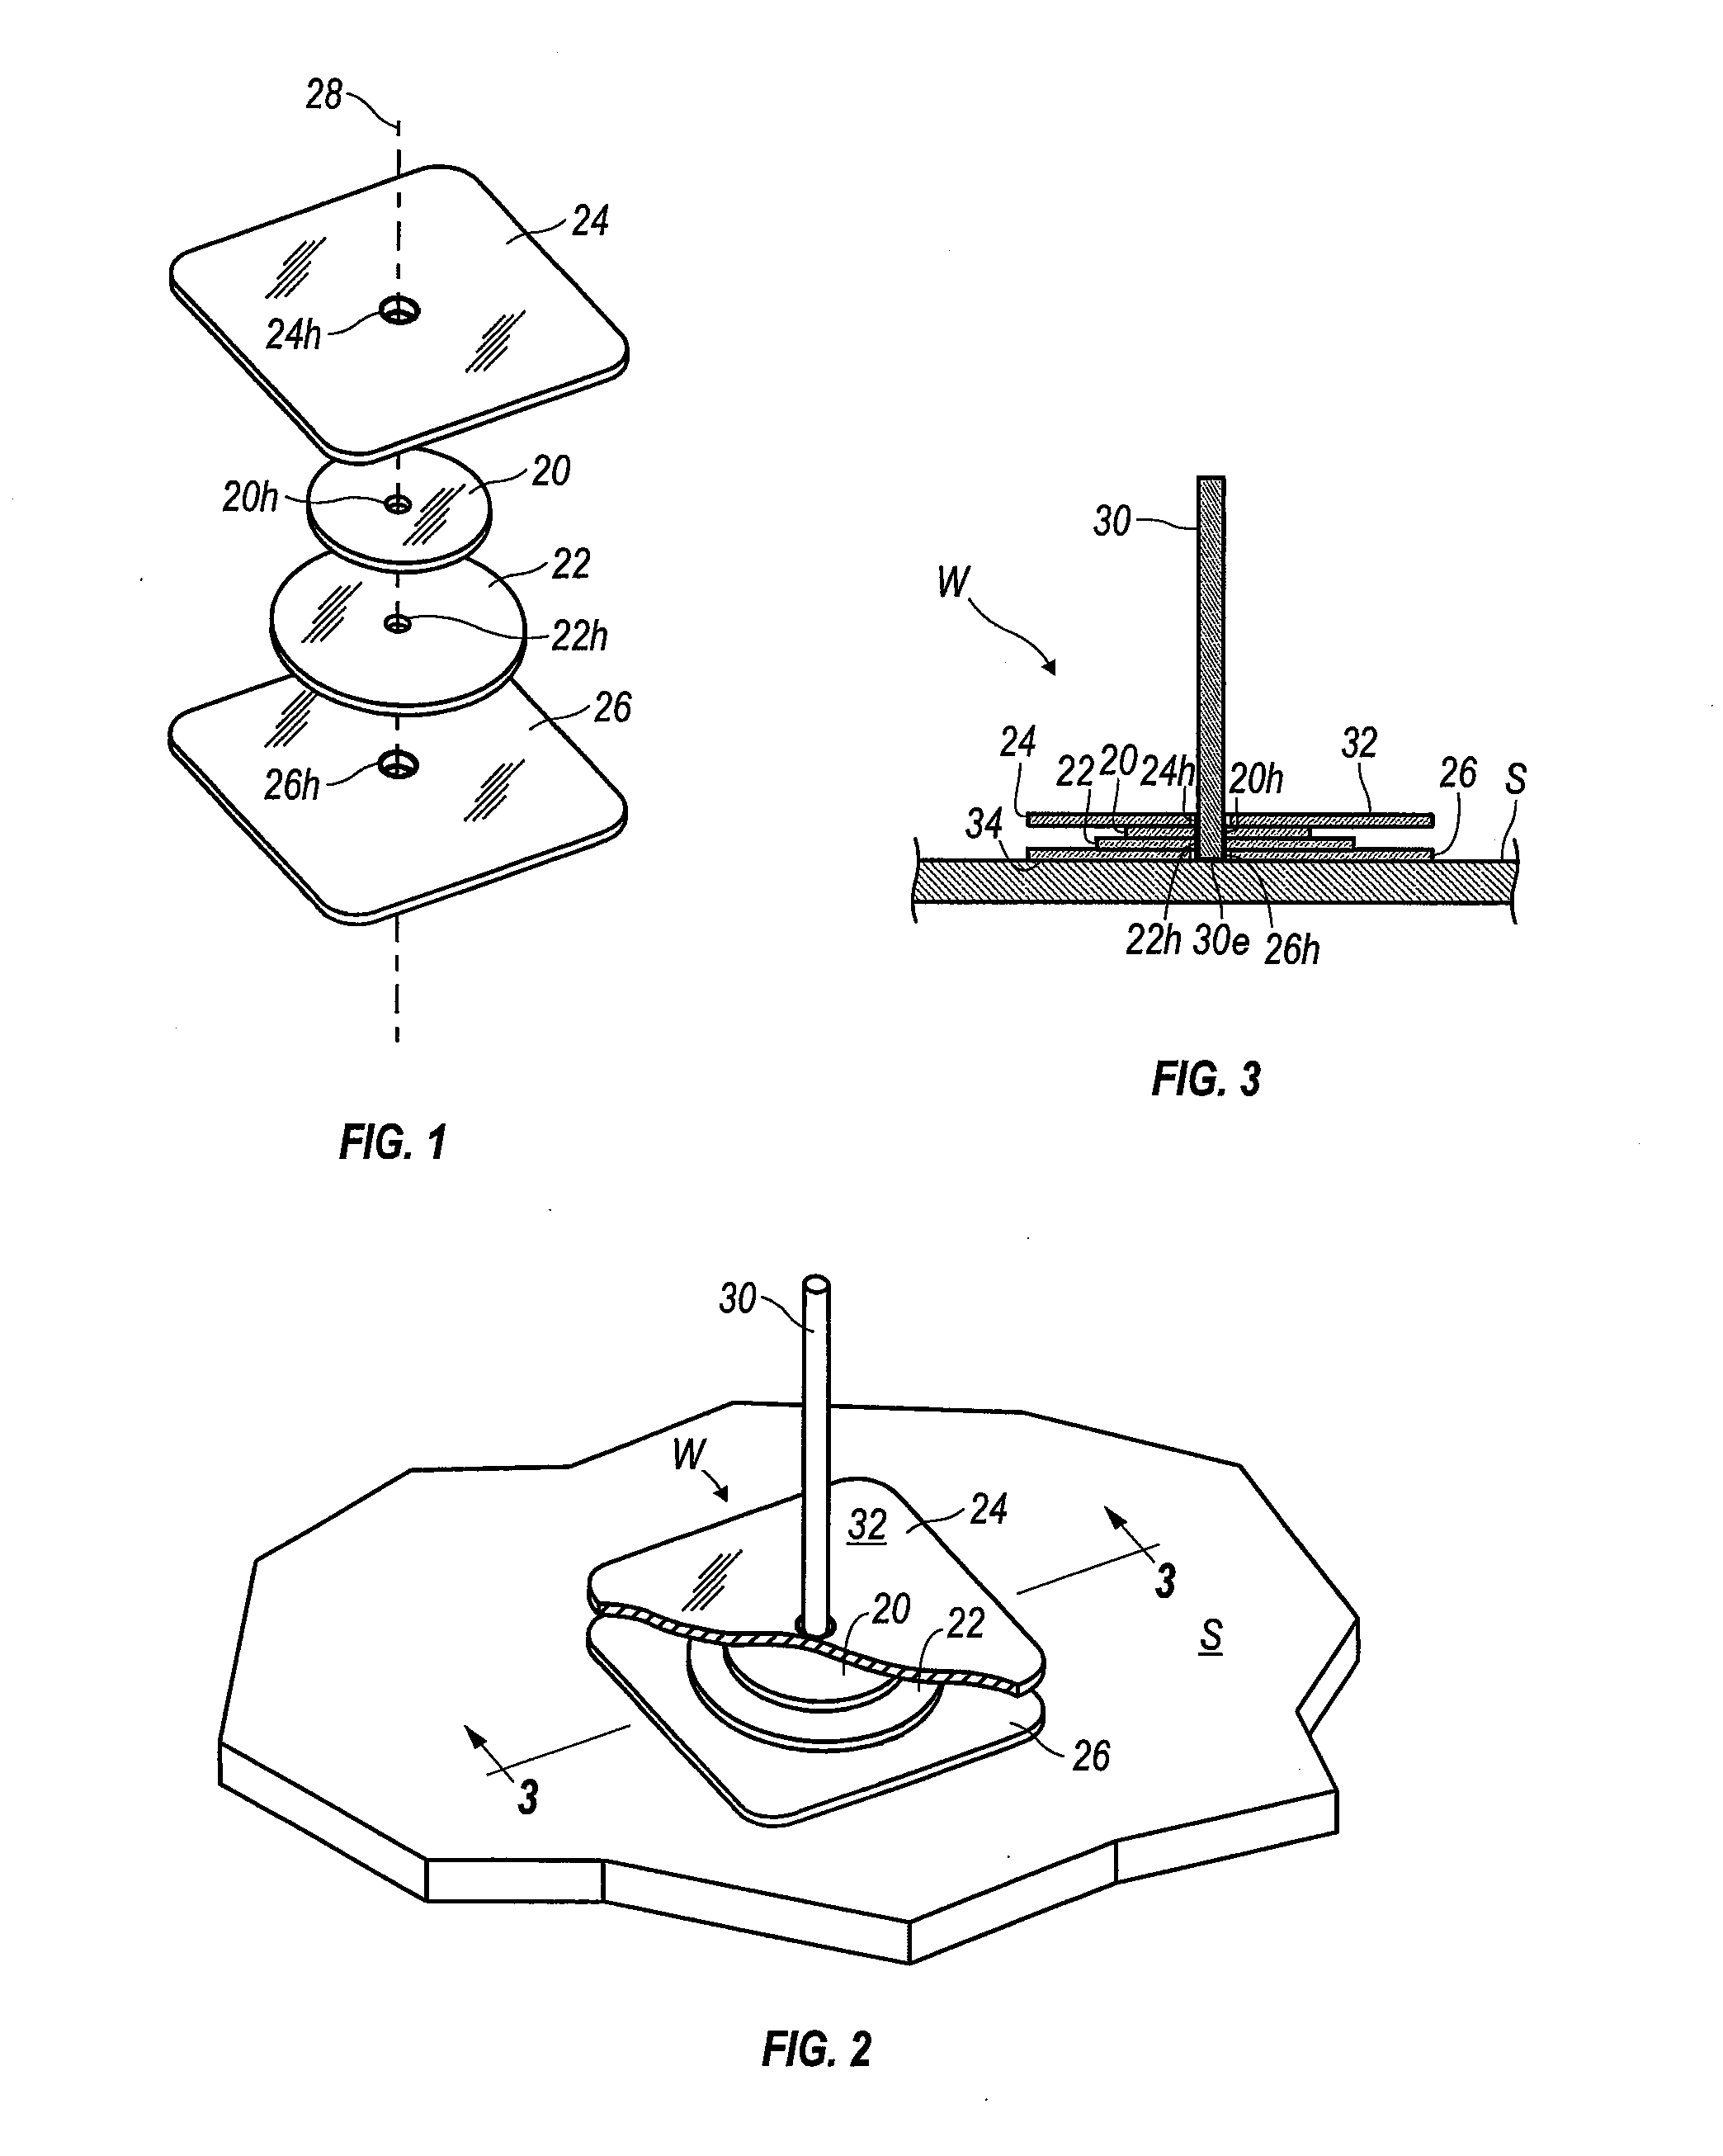 Method of Connecting Jewelry Components